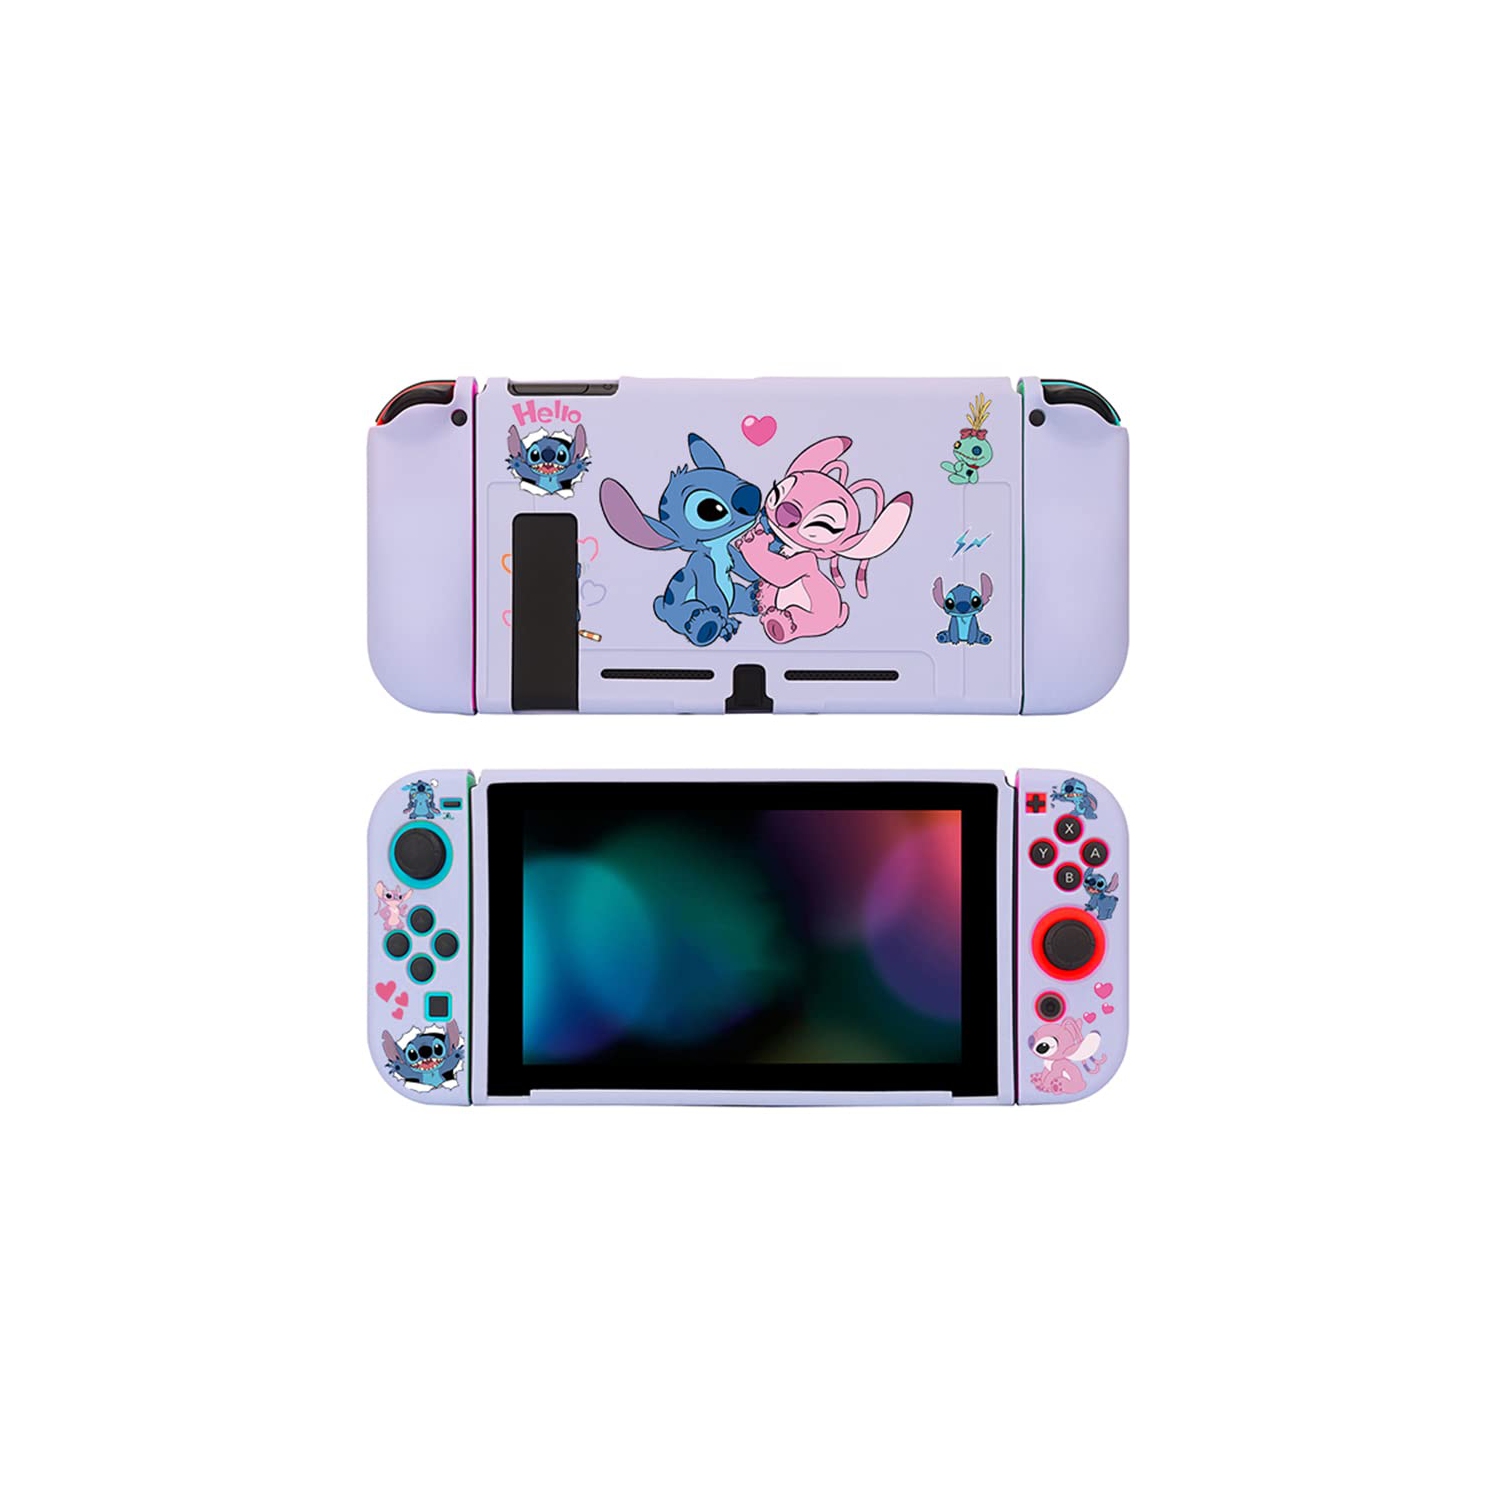 Kawaii Protective Case for Nintendo S , Slim Cartoon Cover for NS Console and Joy-Con Controllers, Shock-Absorption Anti-Scratch Shell